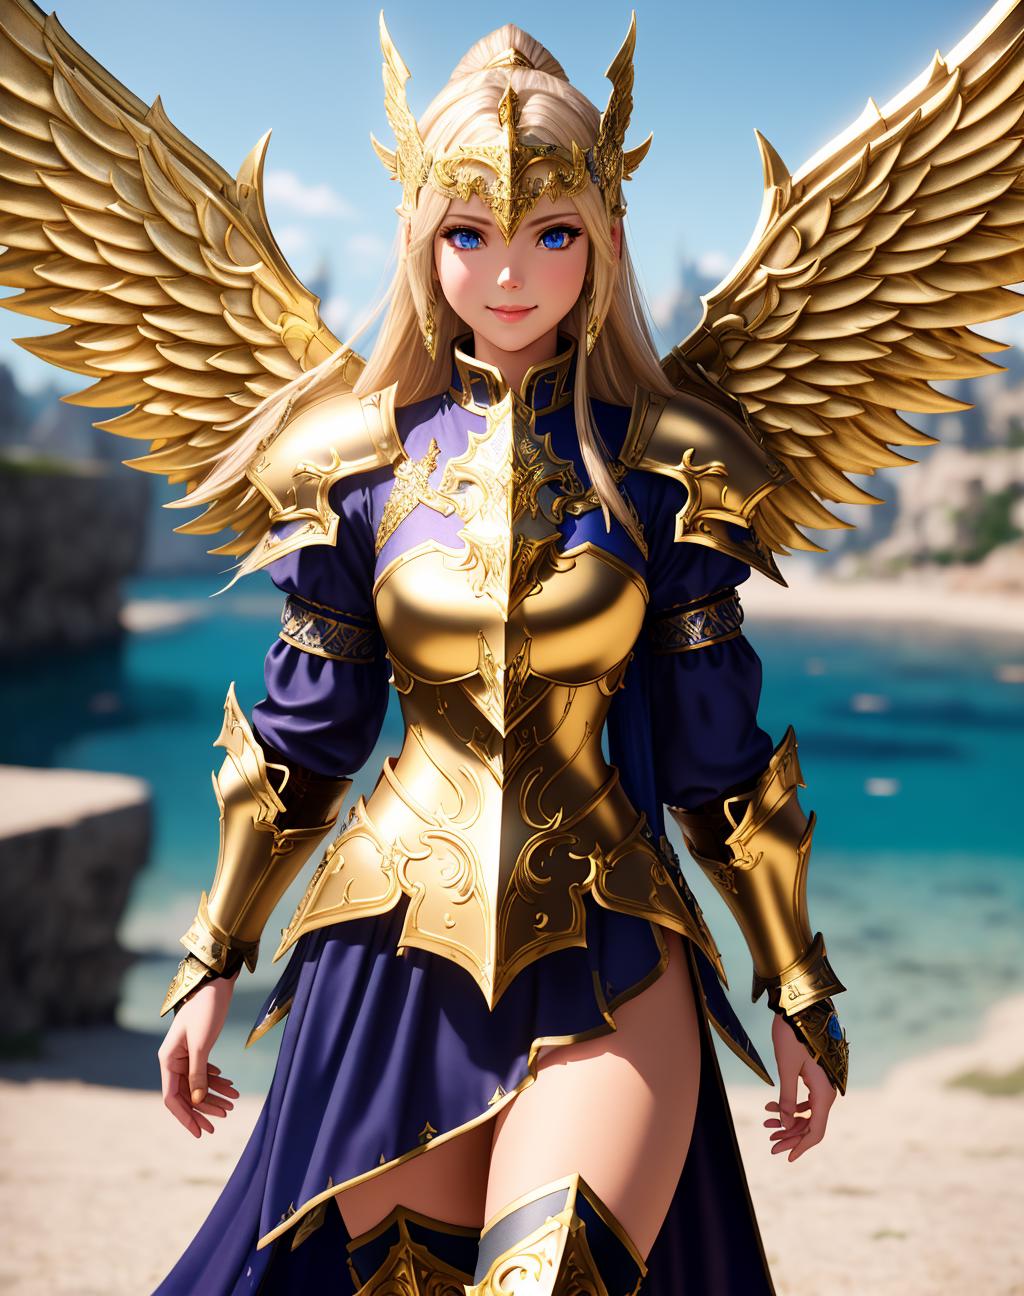 Valkyries image by EDG